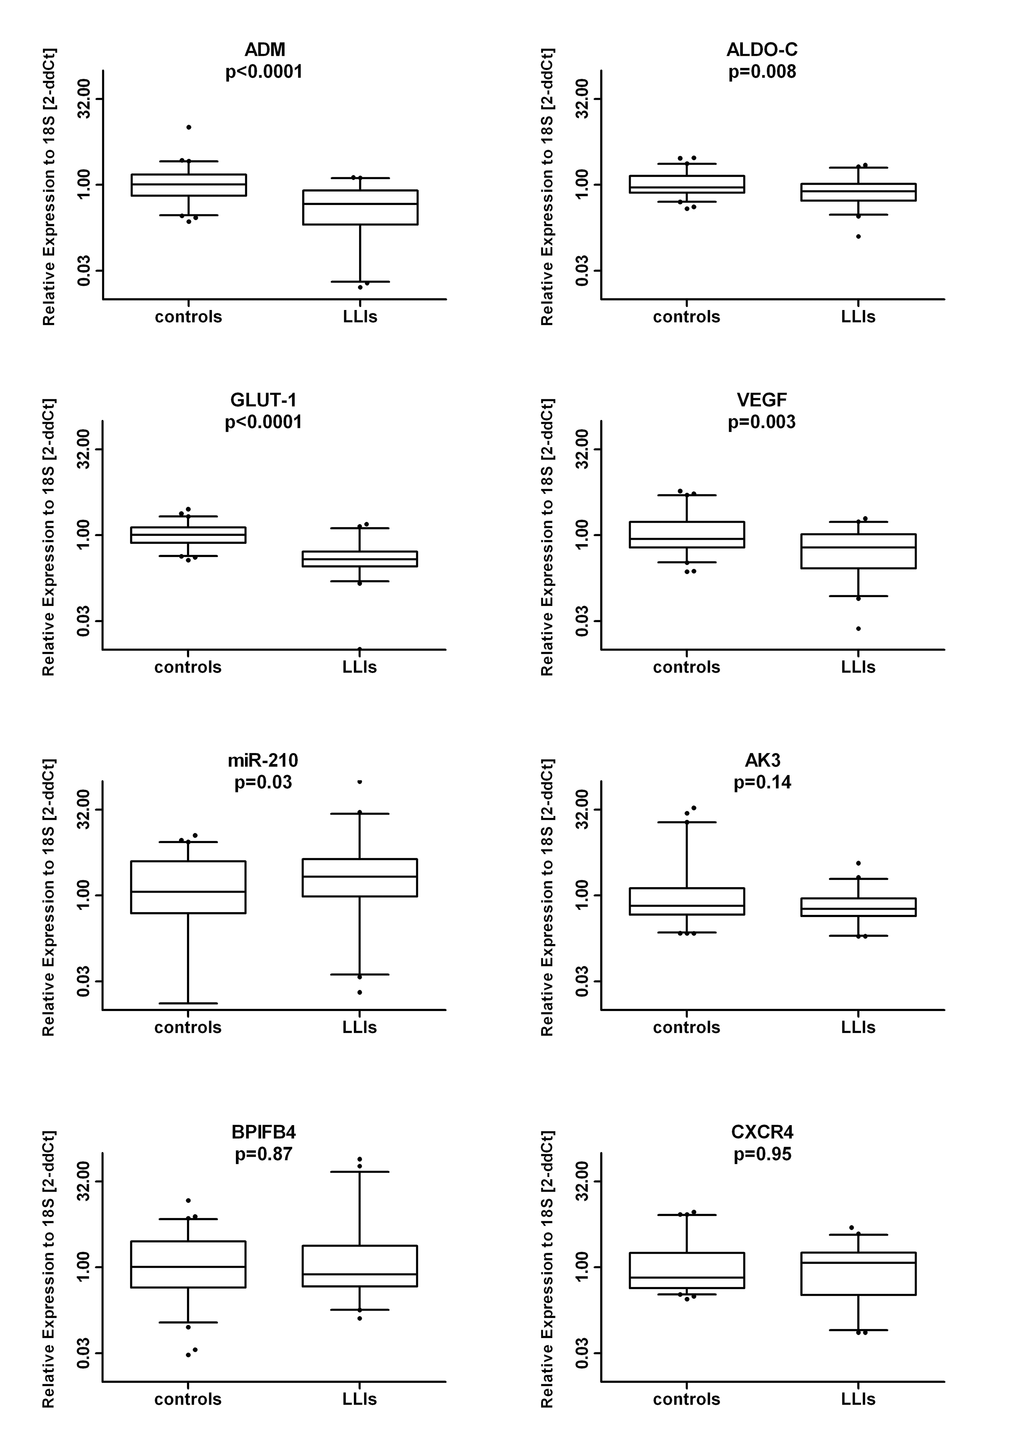 Circulating MNCs of long living individuals (LLIs) show similar BPIFB4 gene levels but modulation in HIF-1α hallmark factors compared to young controls. Box plots of the mRNA levels (log2 scale) of BPIFB4 and HIF-1α-associated factors (CXCR4, ALDO-C, ADM, miR-210, VEGF-A, GLUT-1, AK3) in LLIs (N=45) versus controls (N=63).